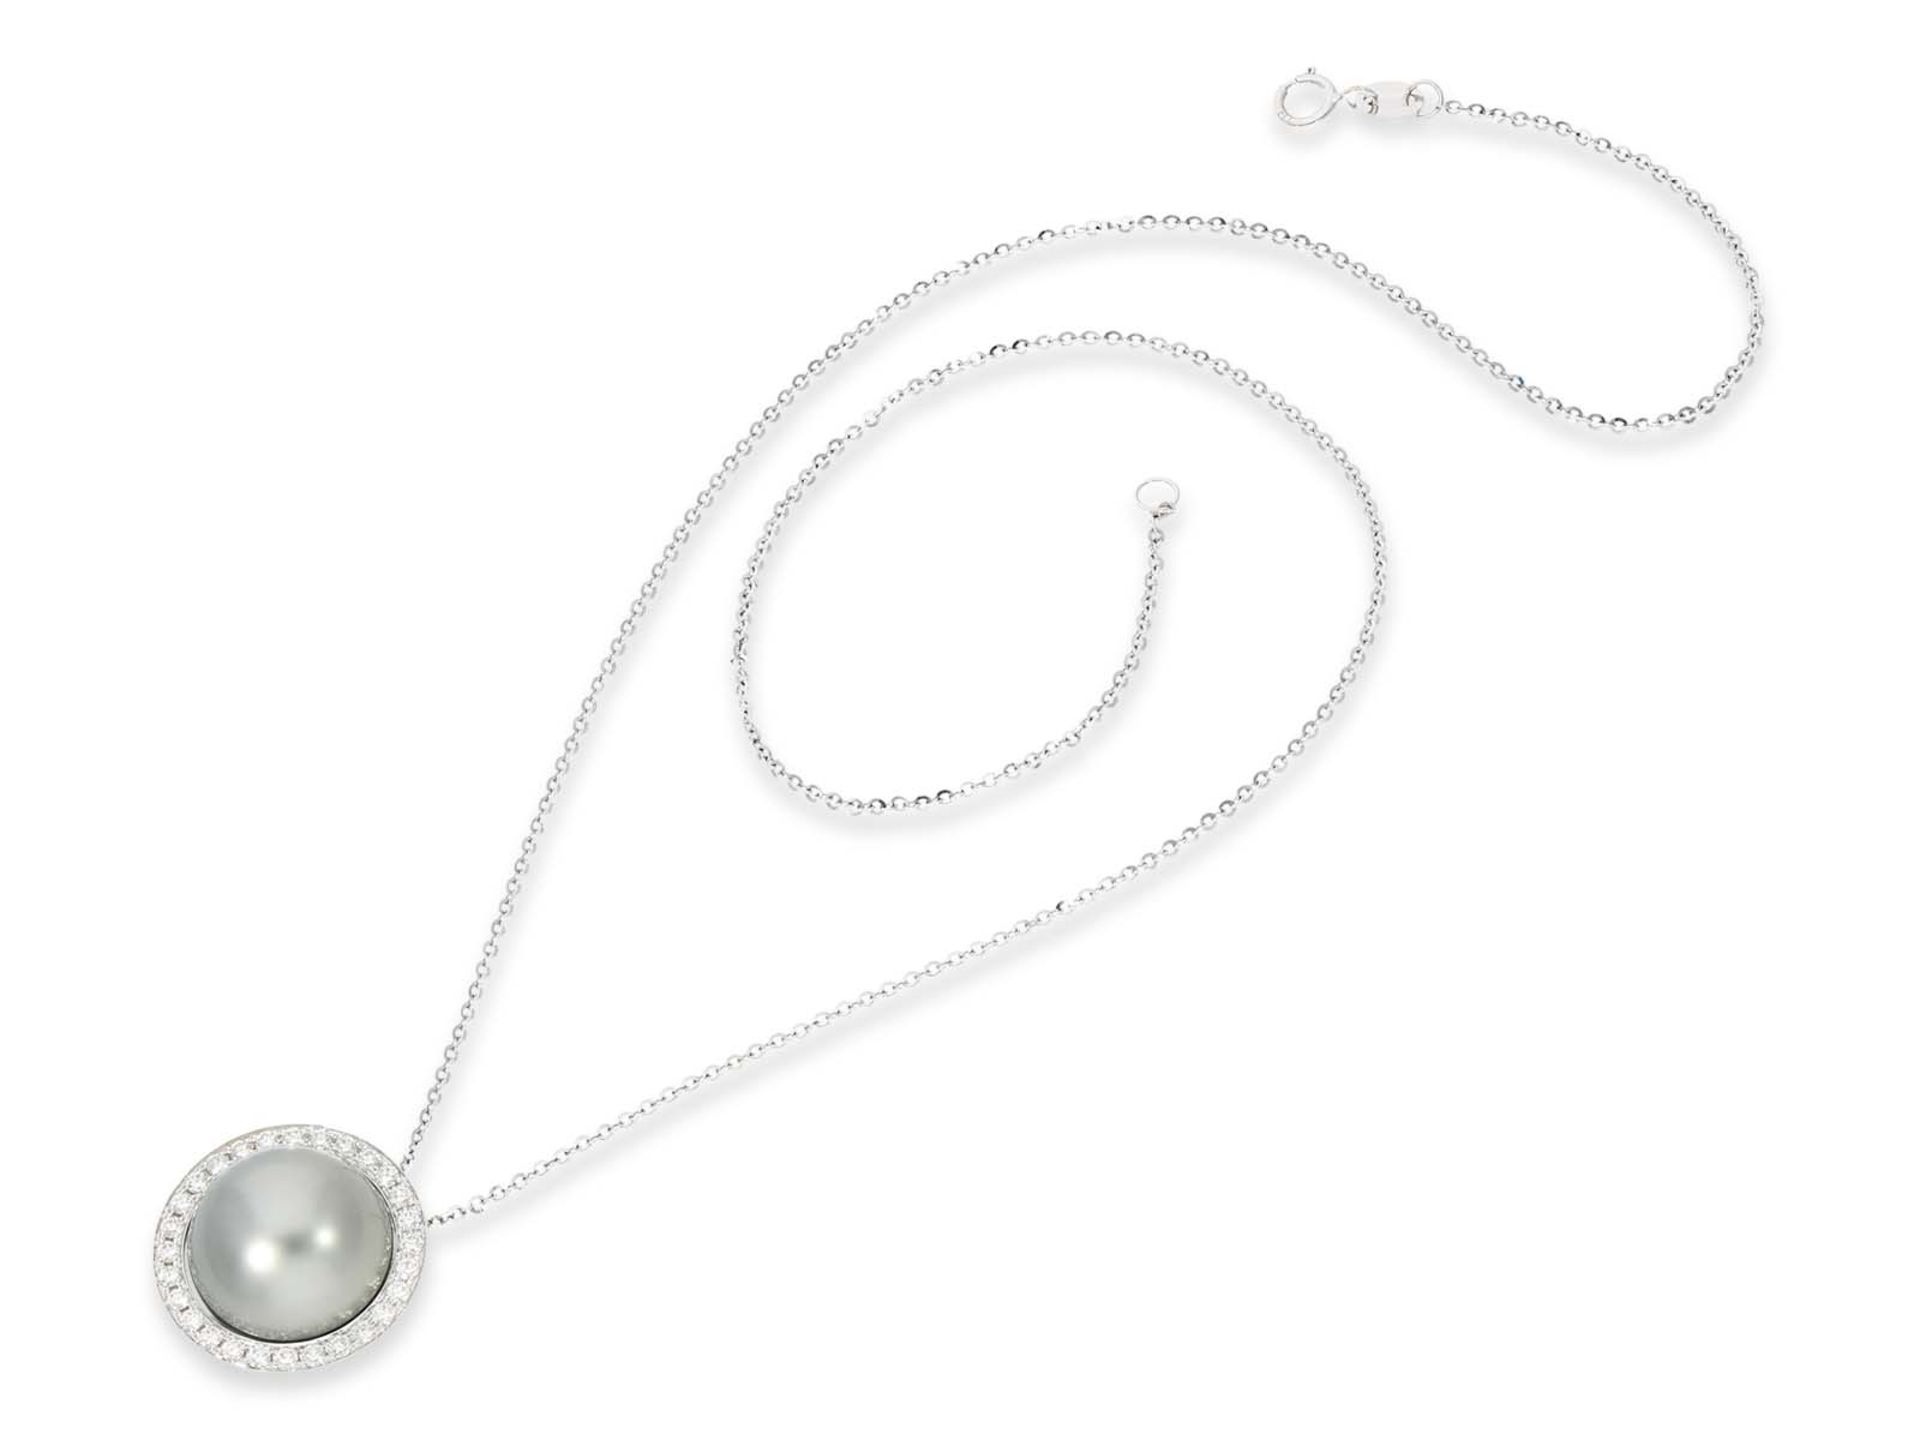 Necklace/Collier: necklace with white gold high quality and modern pendant with large fine Tahiti cu - Image 2 of 2